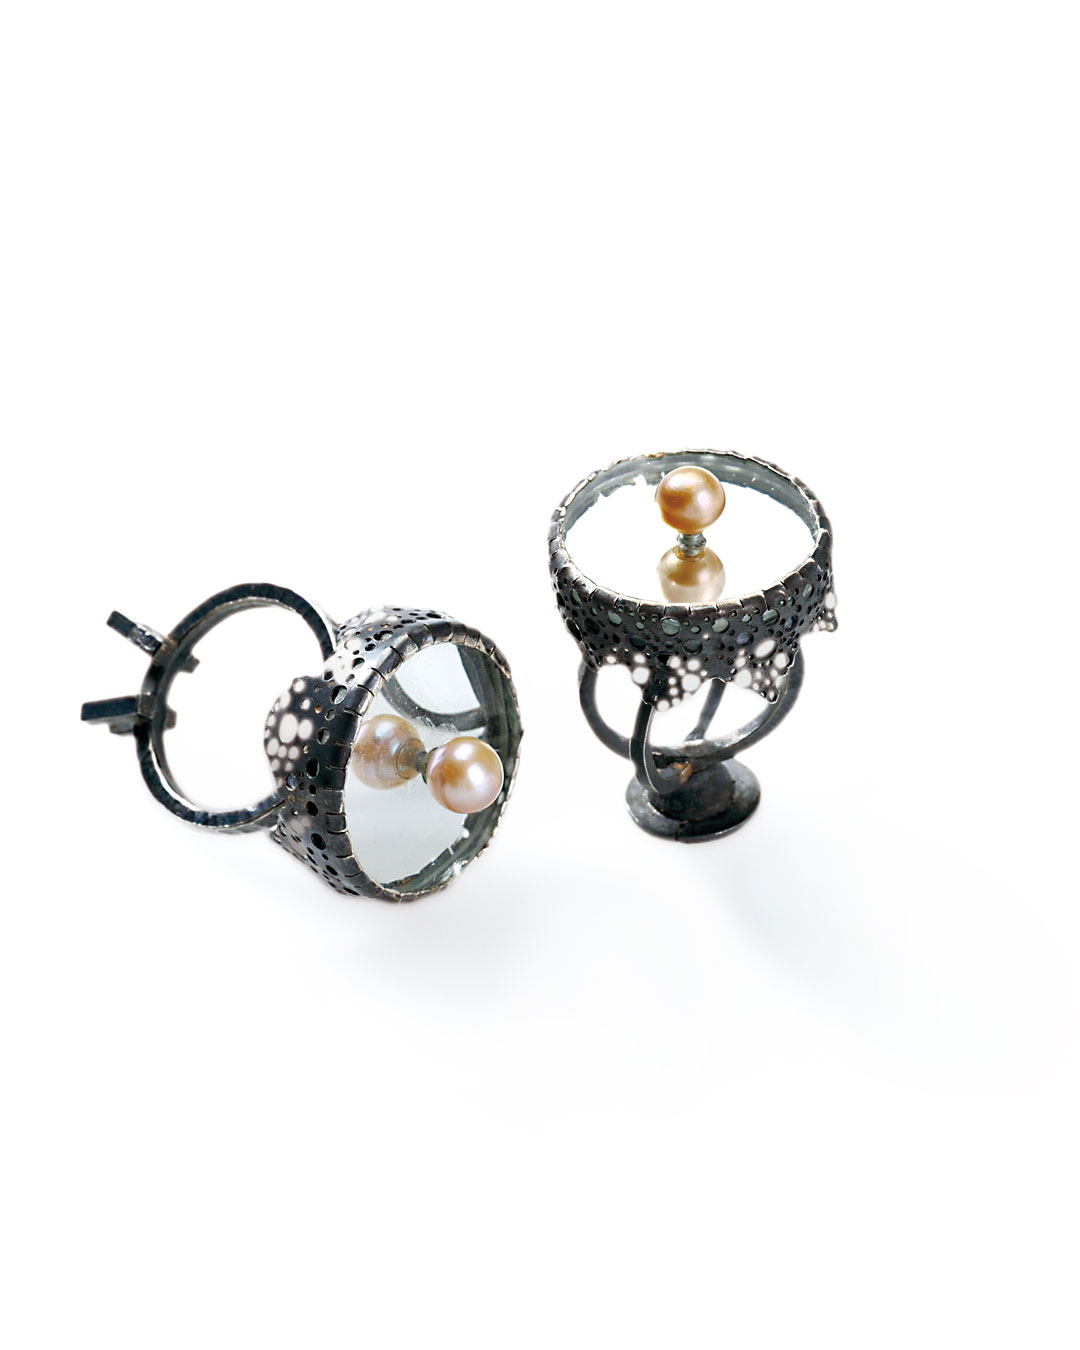 Ulrich Reithofer, Tea Table I-IV, 2009, ring; silver, freshwater pearl, oxide, mirror glass, 43 x 28 x 28 mm, €570 each